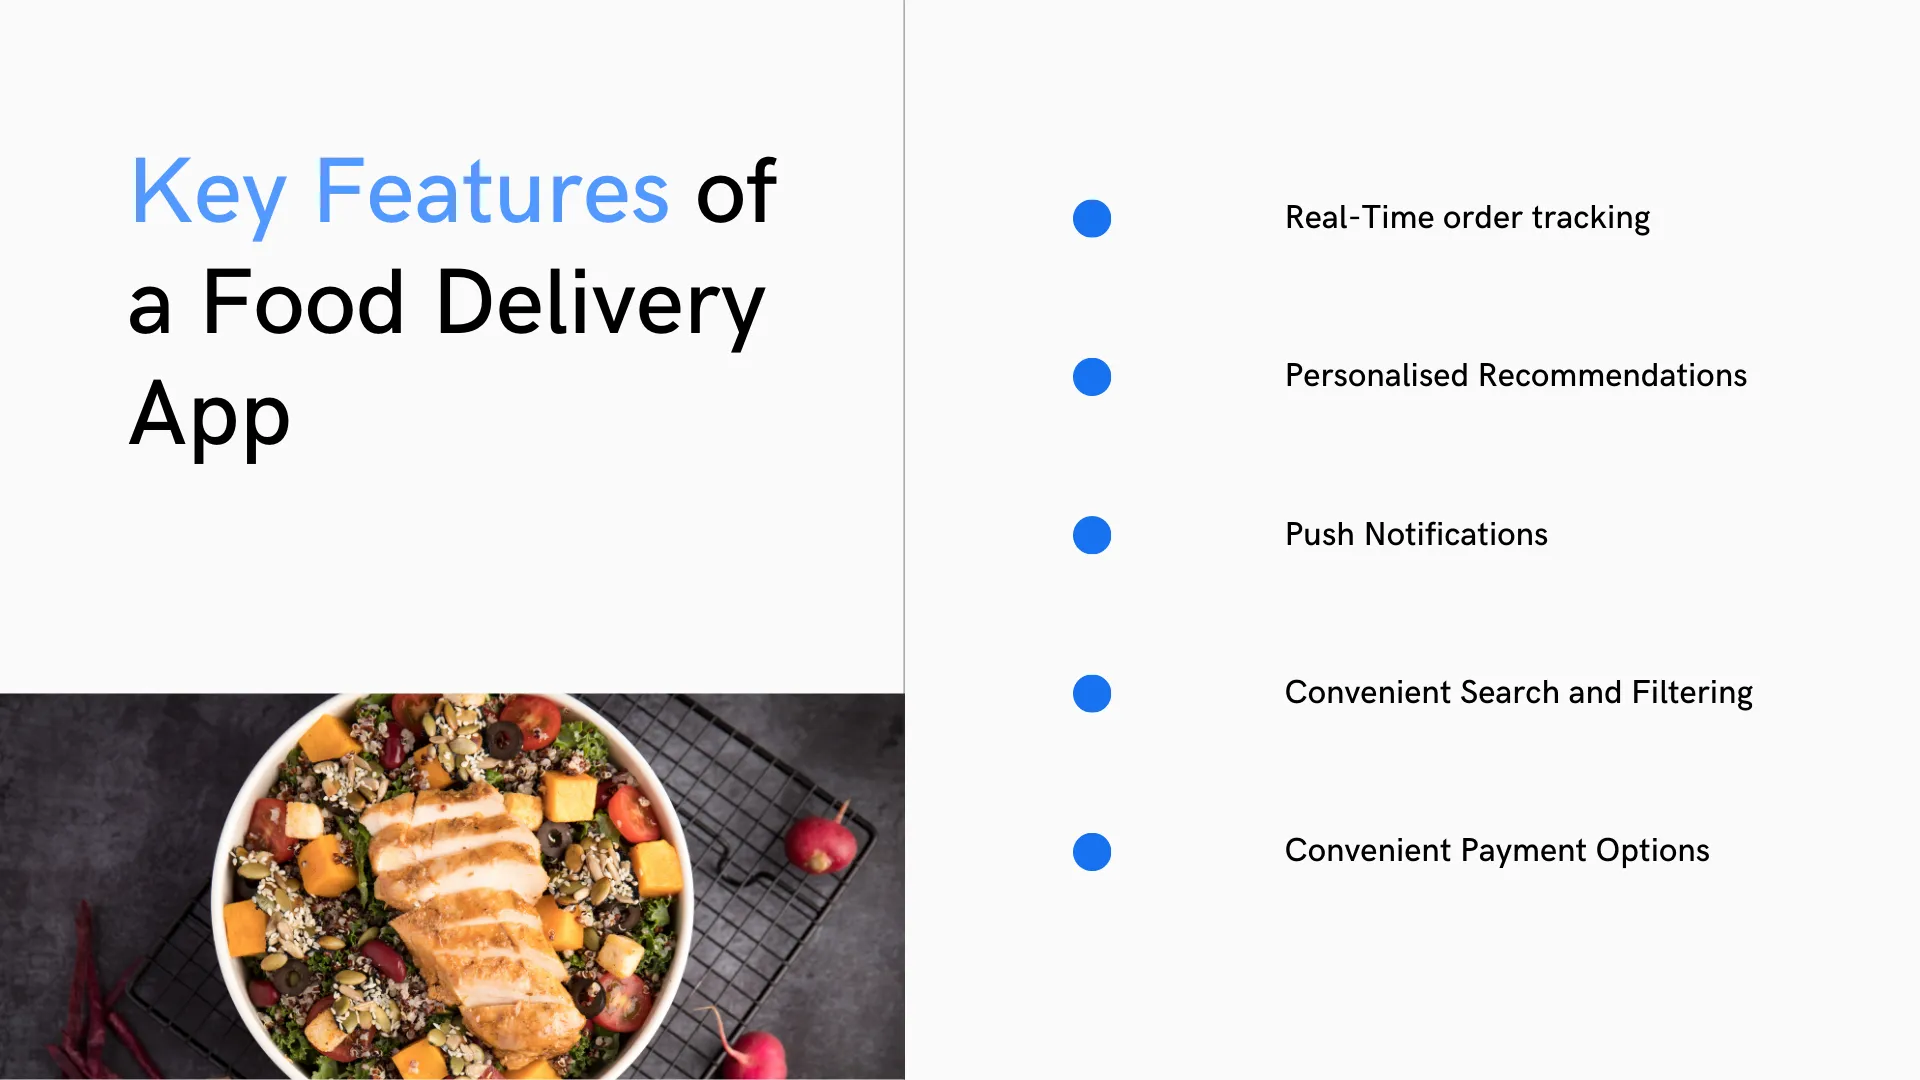 Key Features of a Food Delivery App